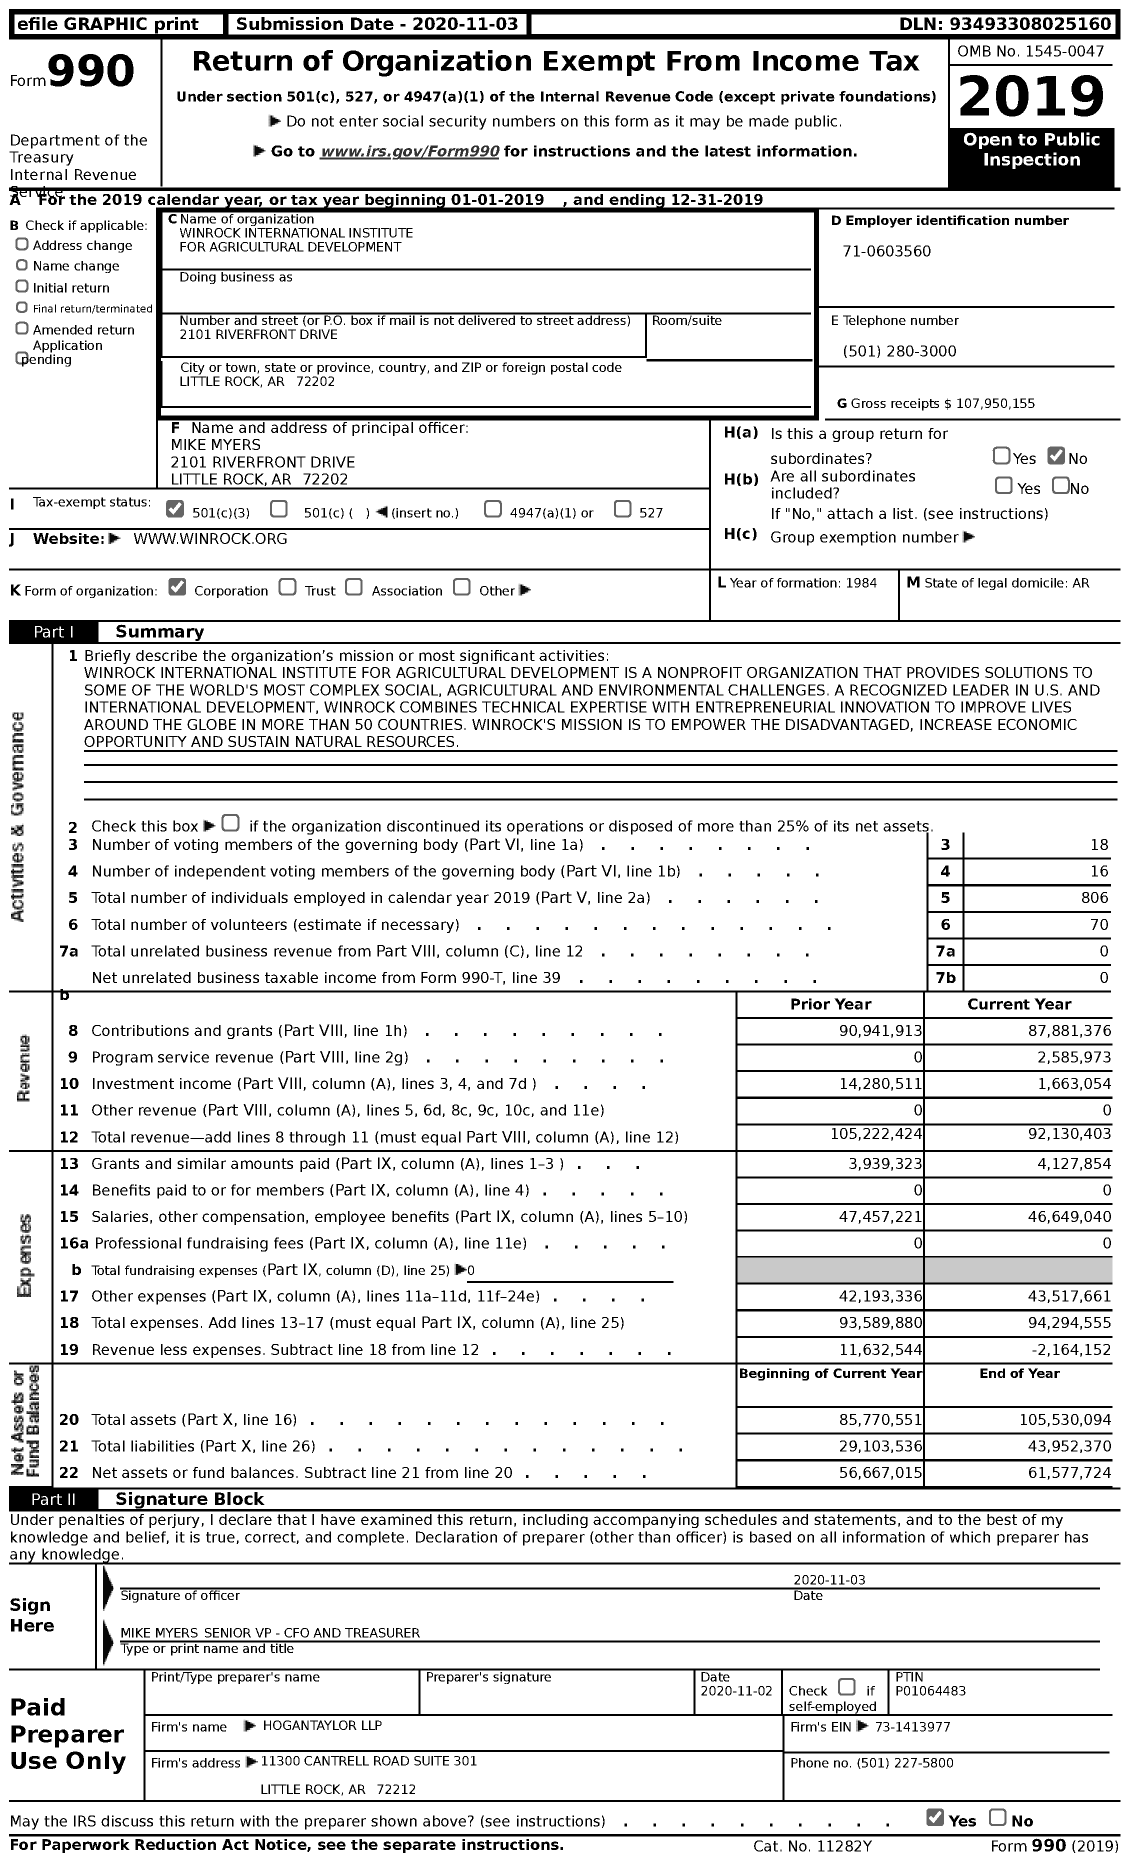 Image of first page of 2019 Form 990 for Winrock International Institute for Agricultural Development